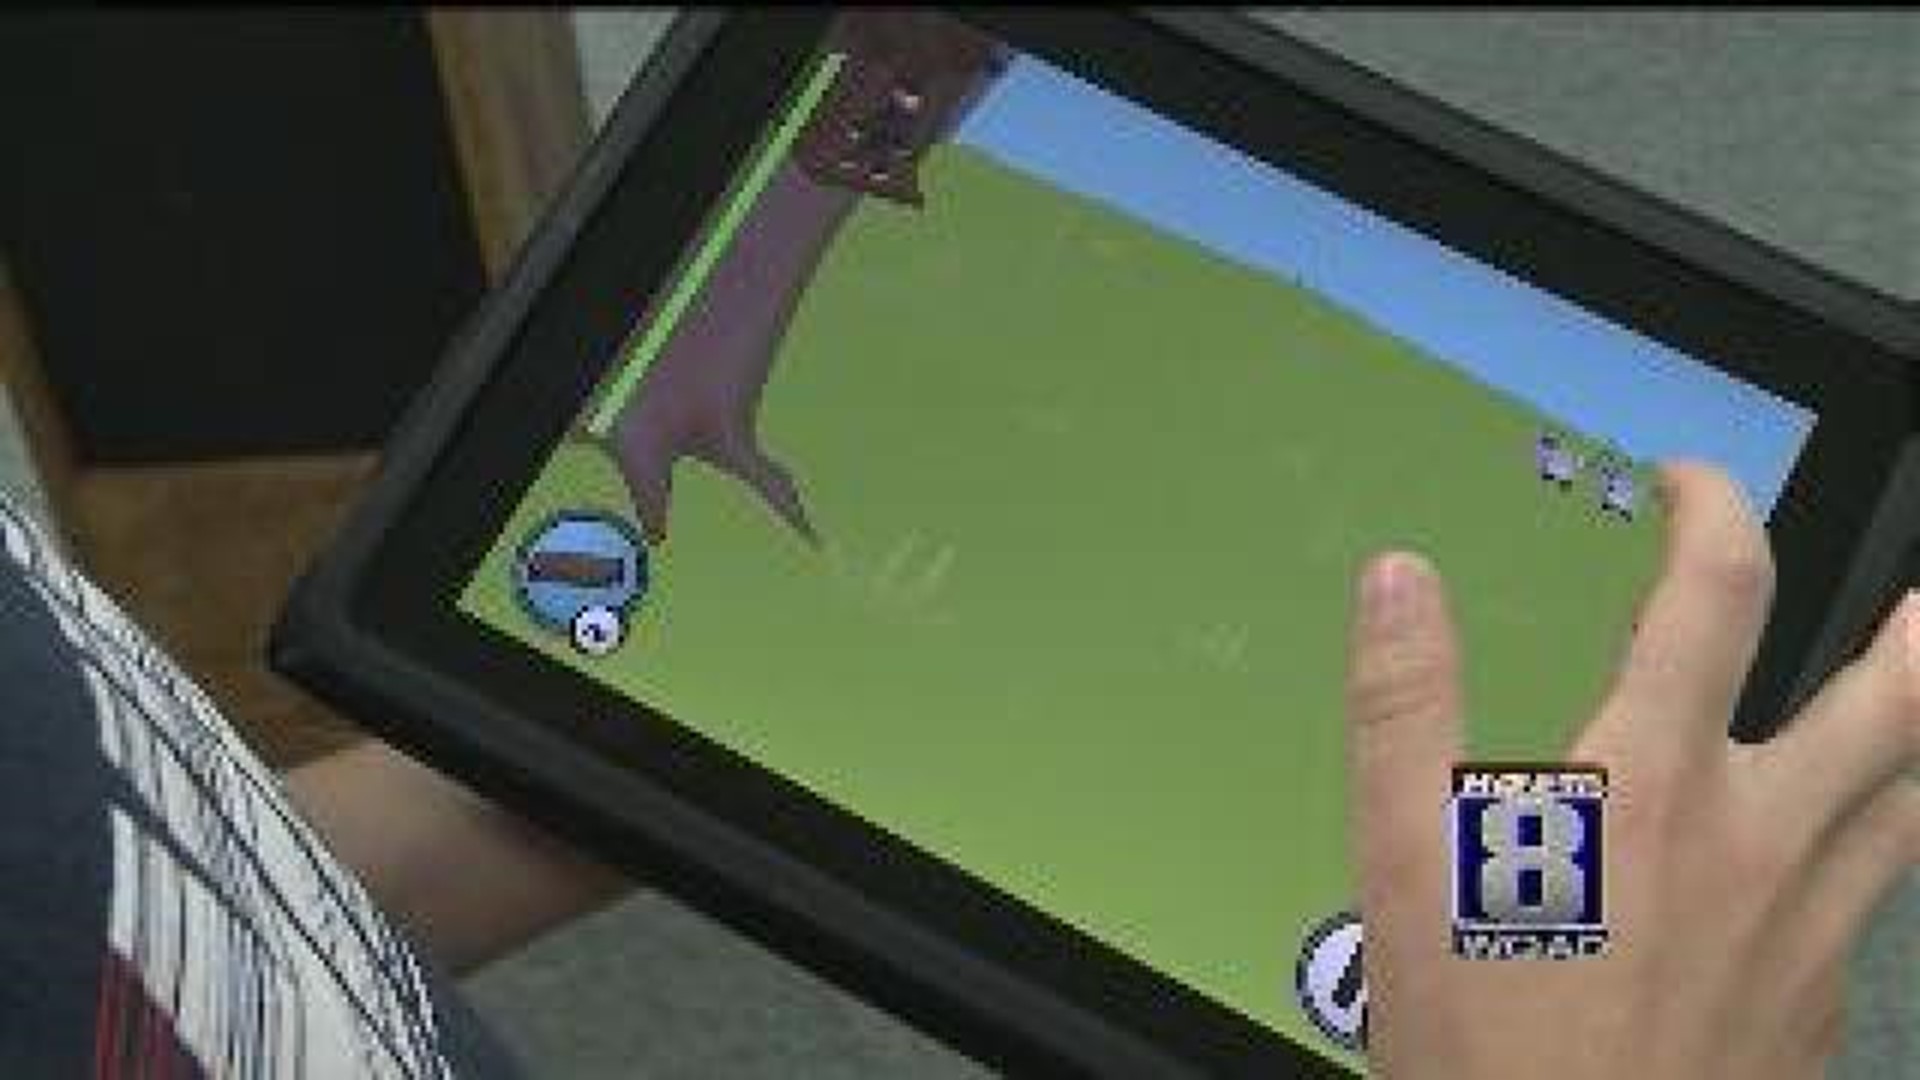 Grant provides iPads to local schools